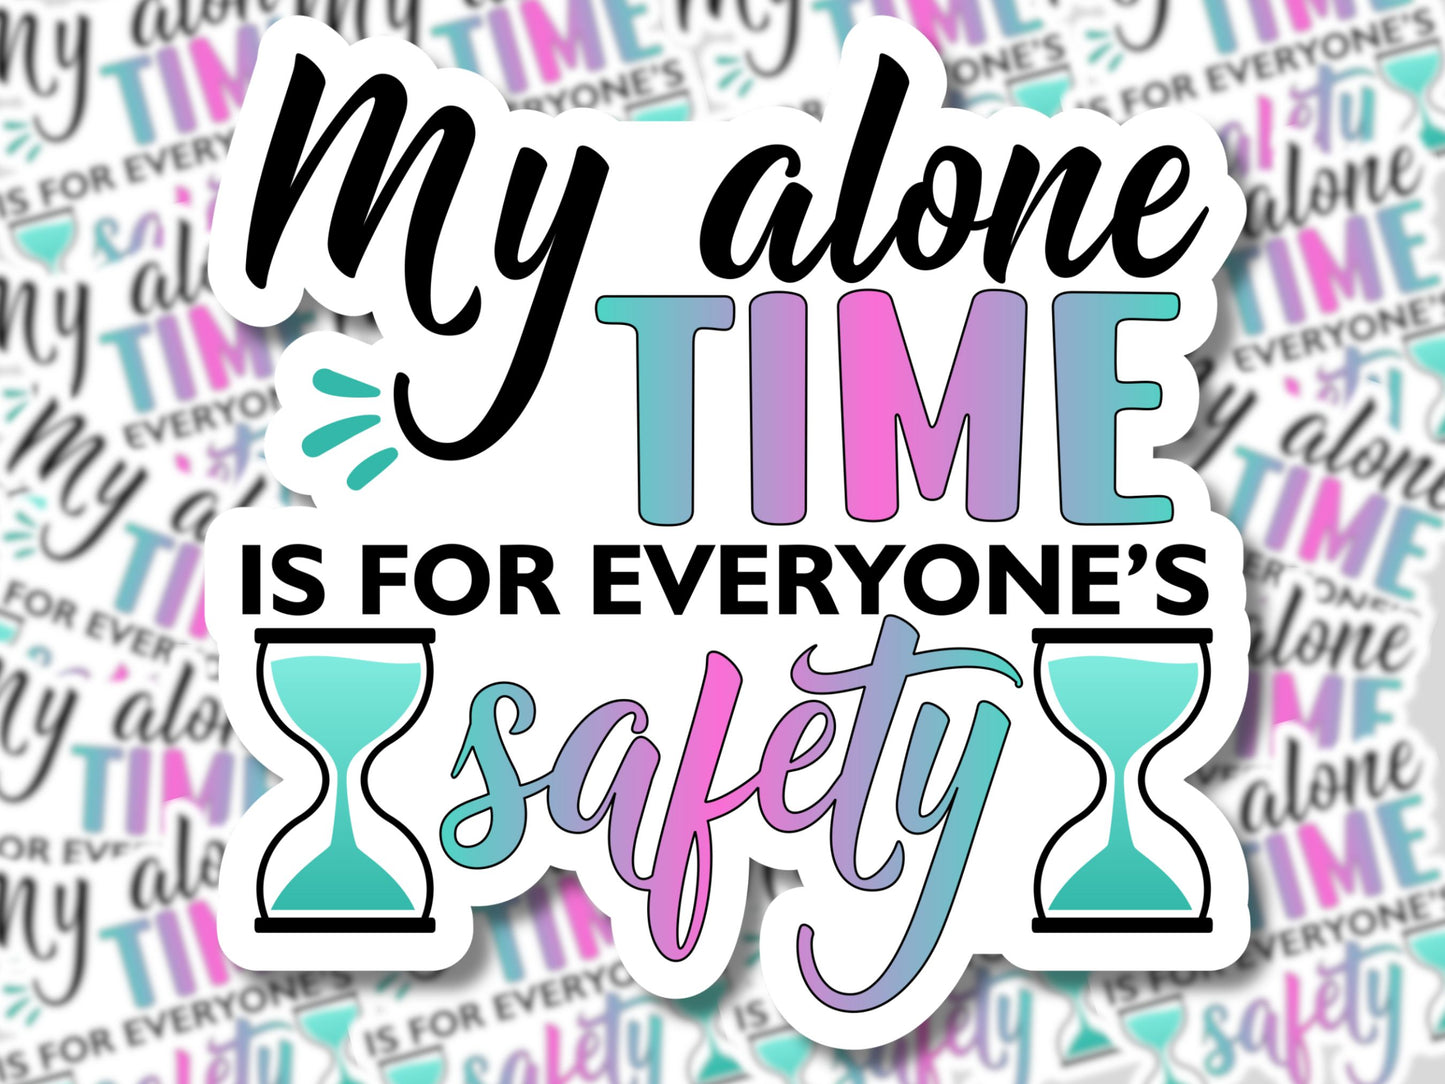 My Alone Time Is for Everyone's Safety Sticker